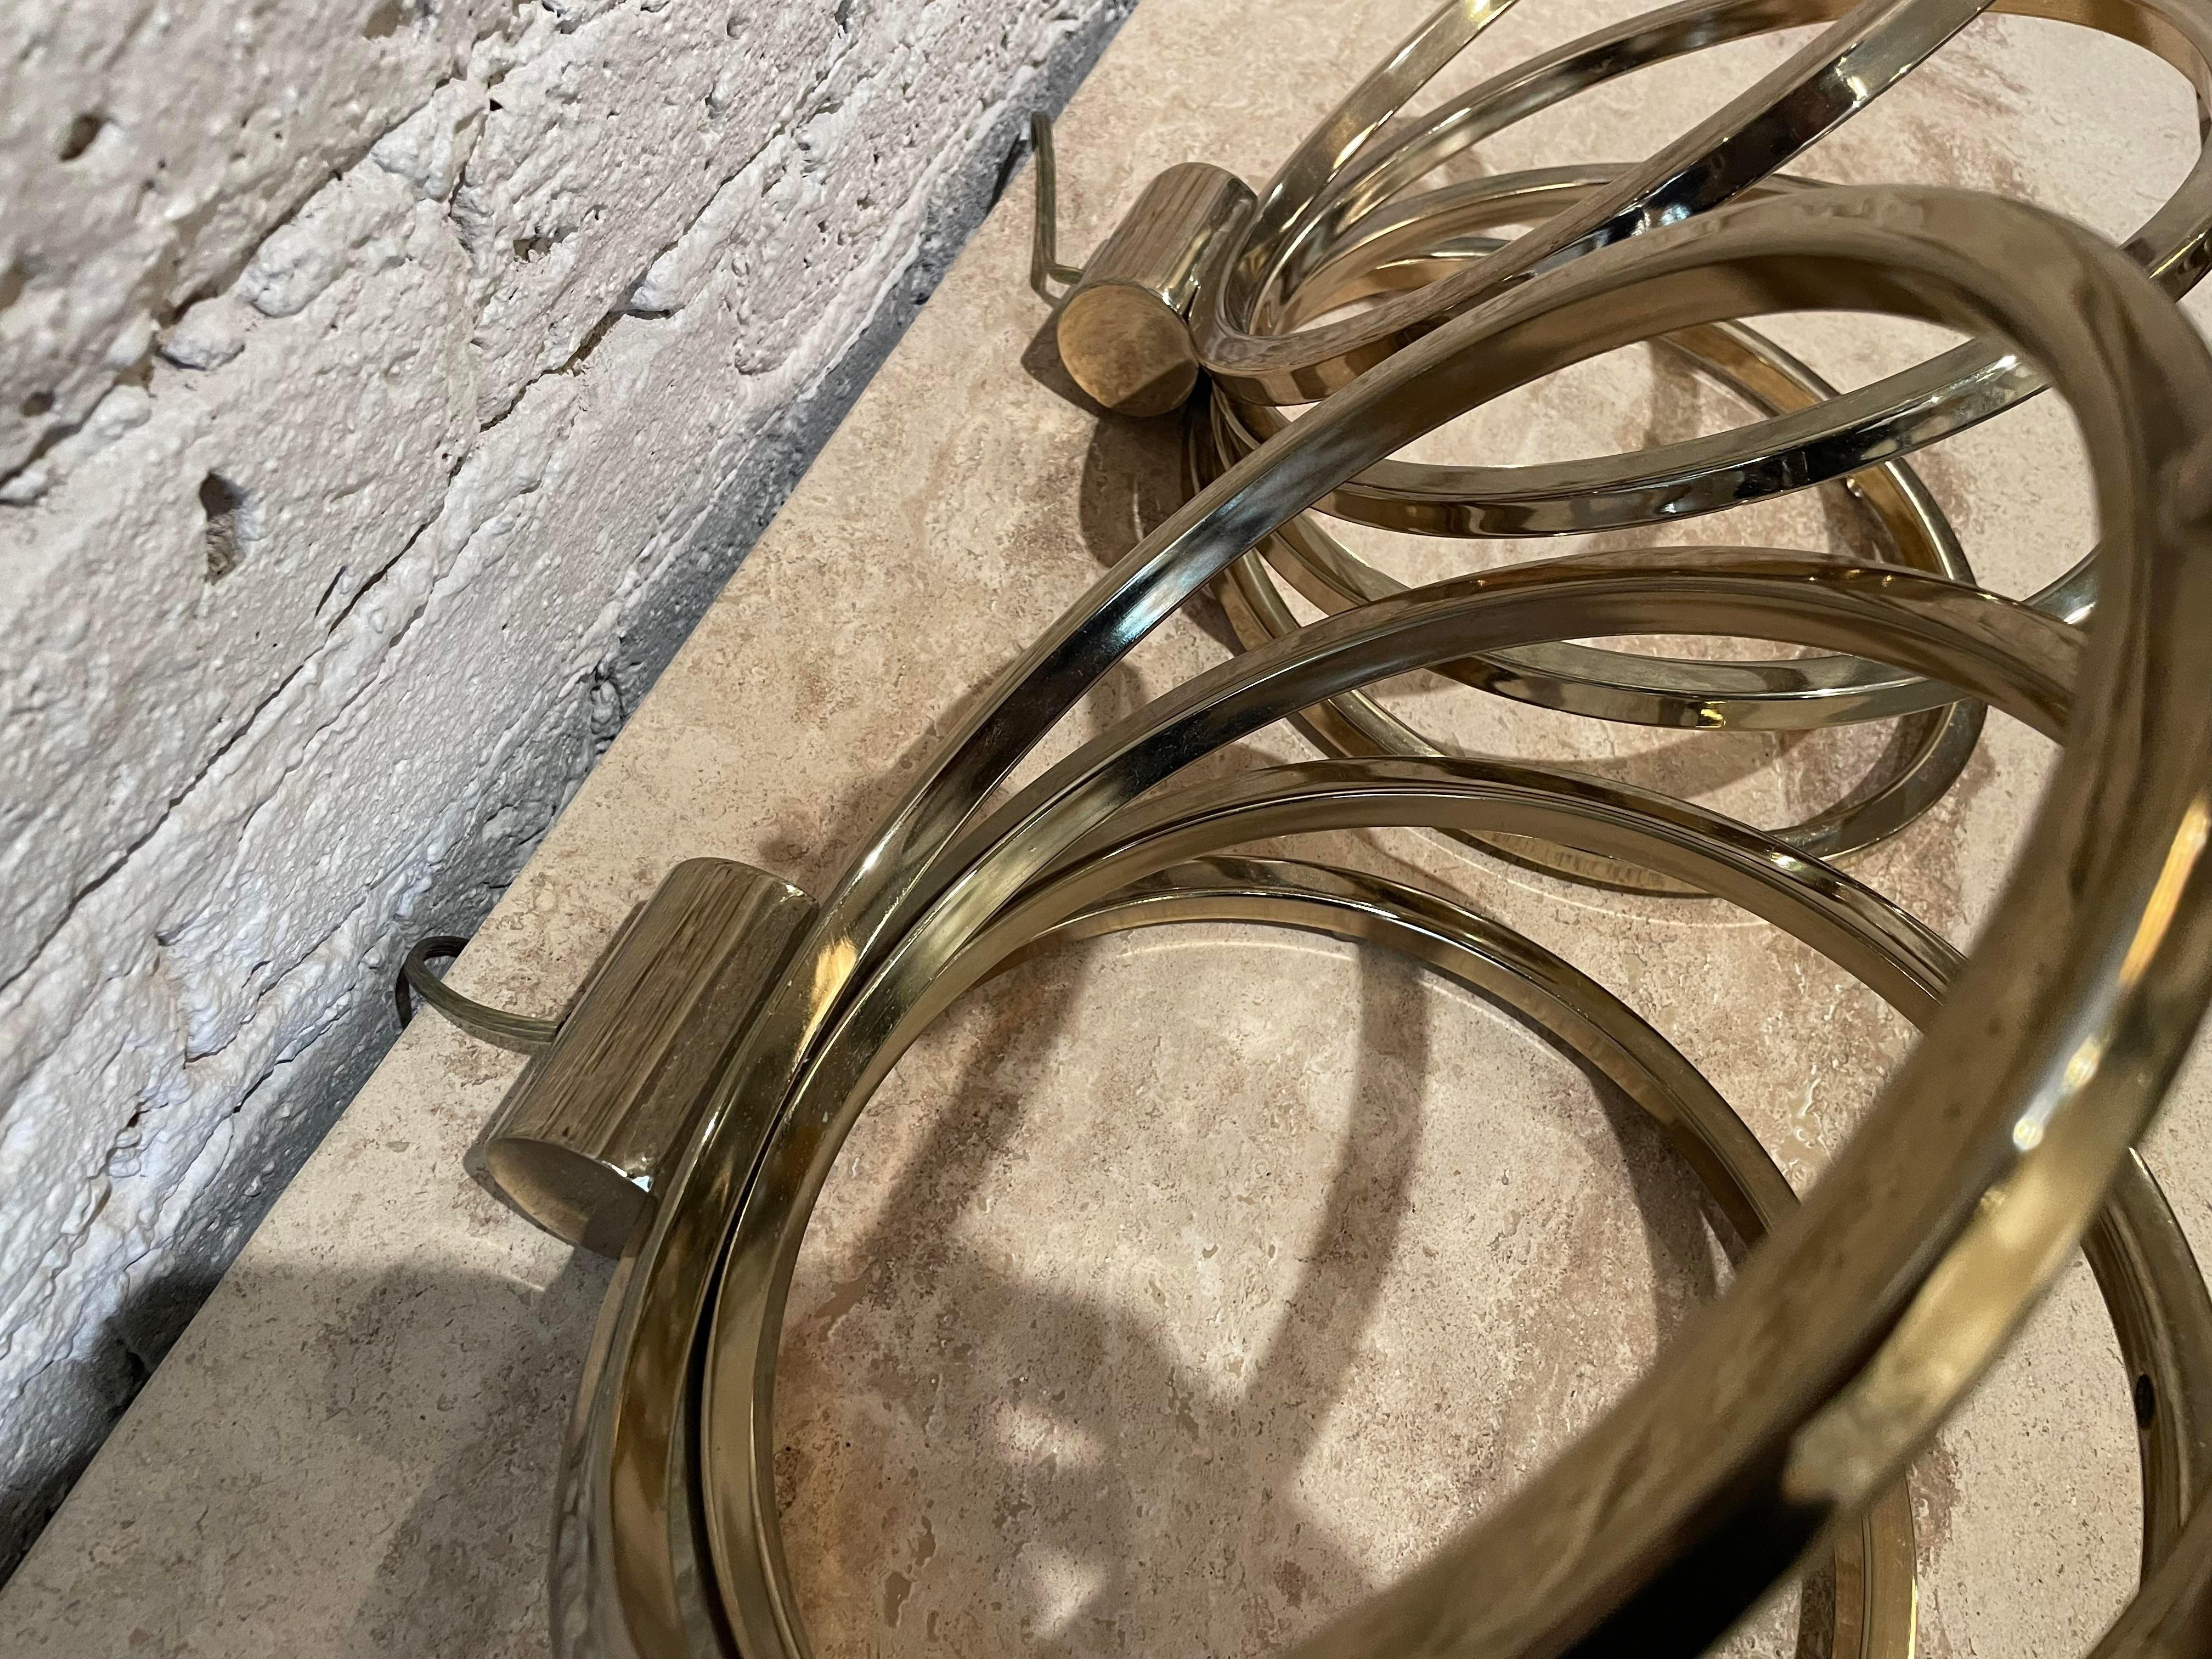 1960s Hollywood Regency Mid Century Vintage Brass Spiral Lamps - a Pair For Sale 2